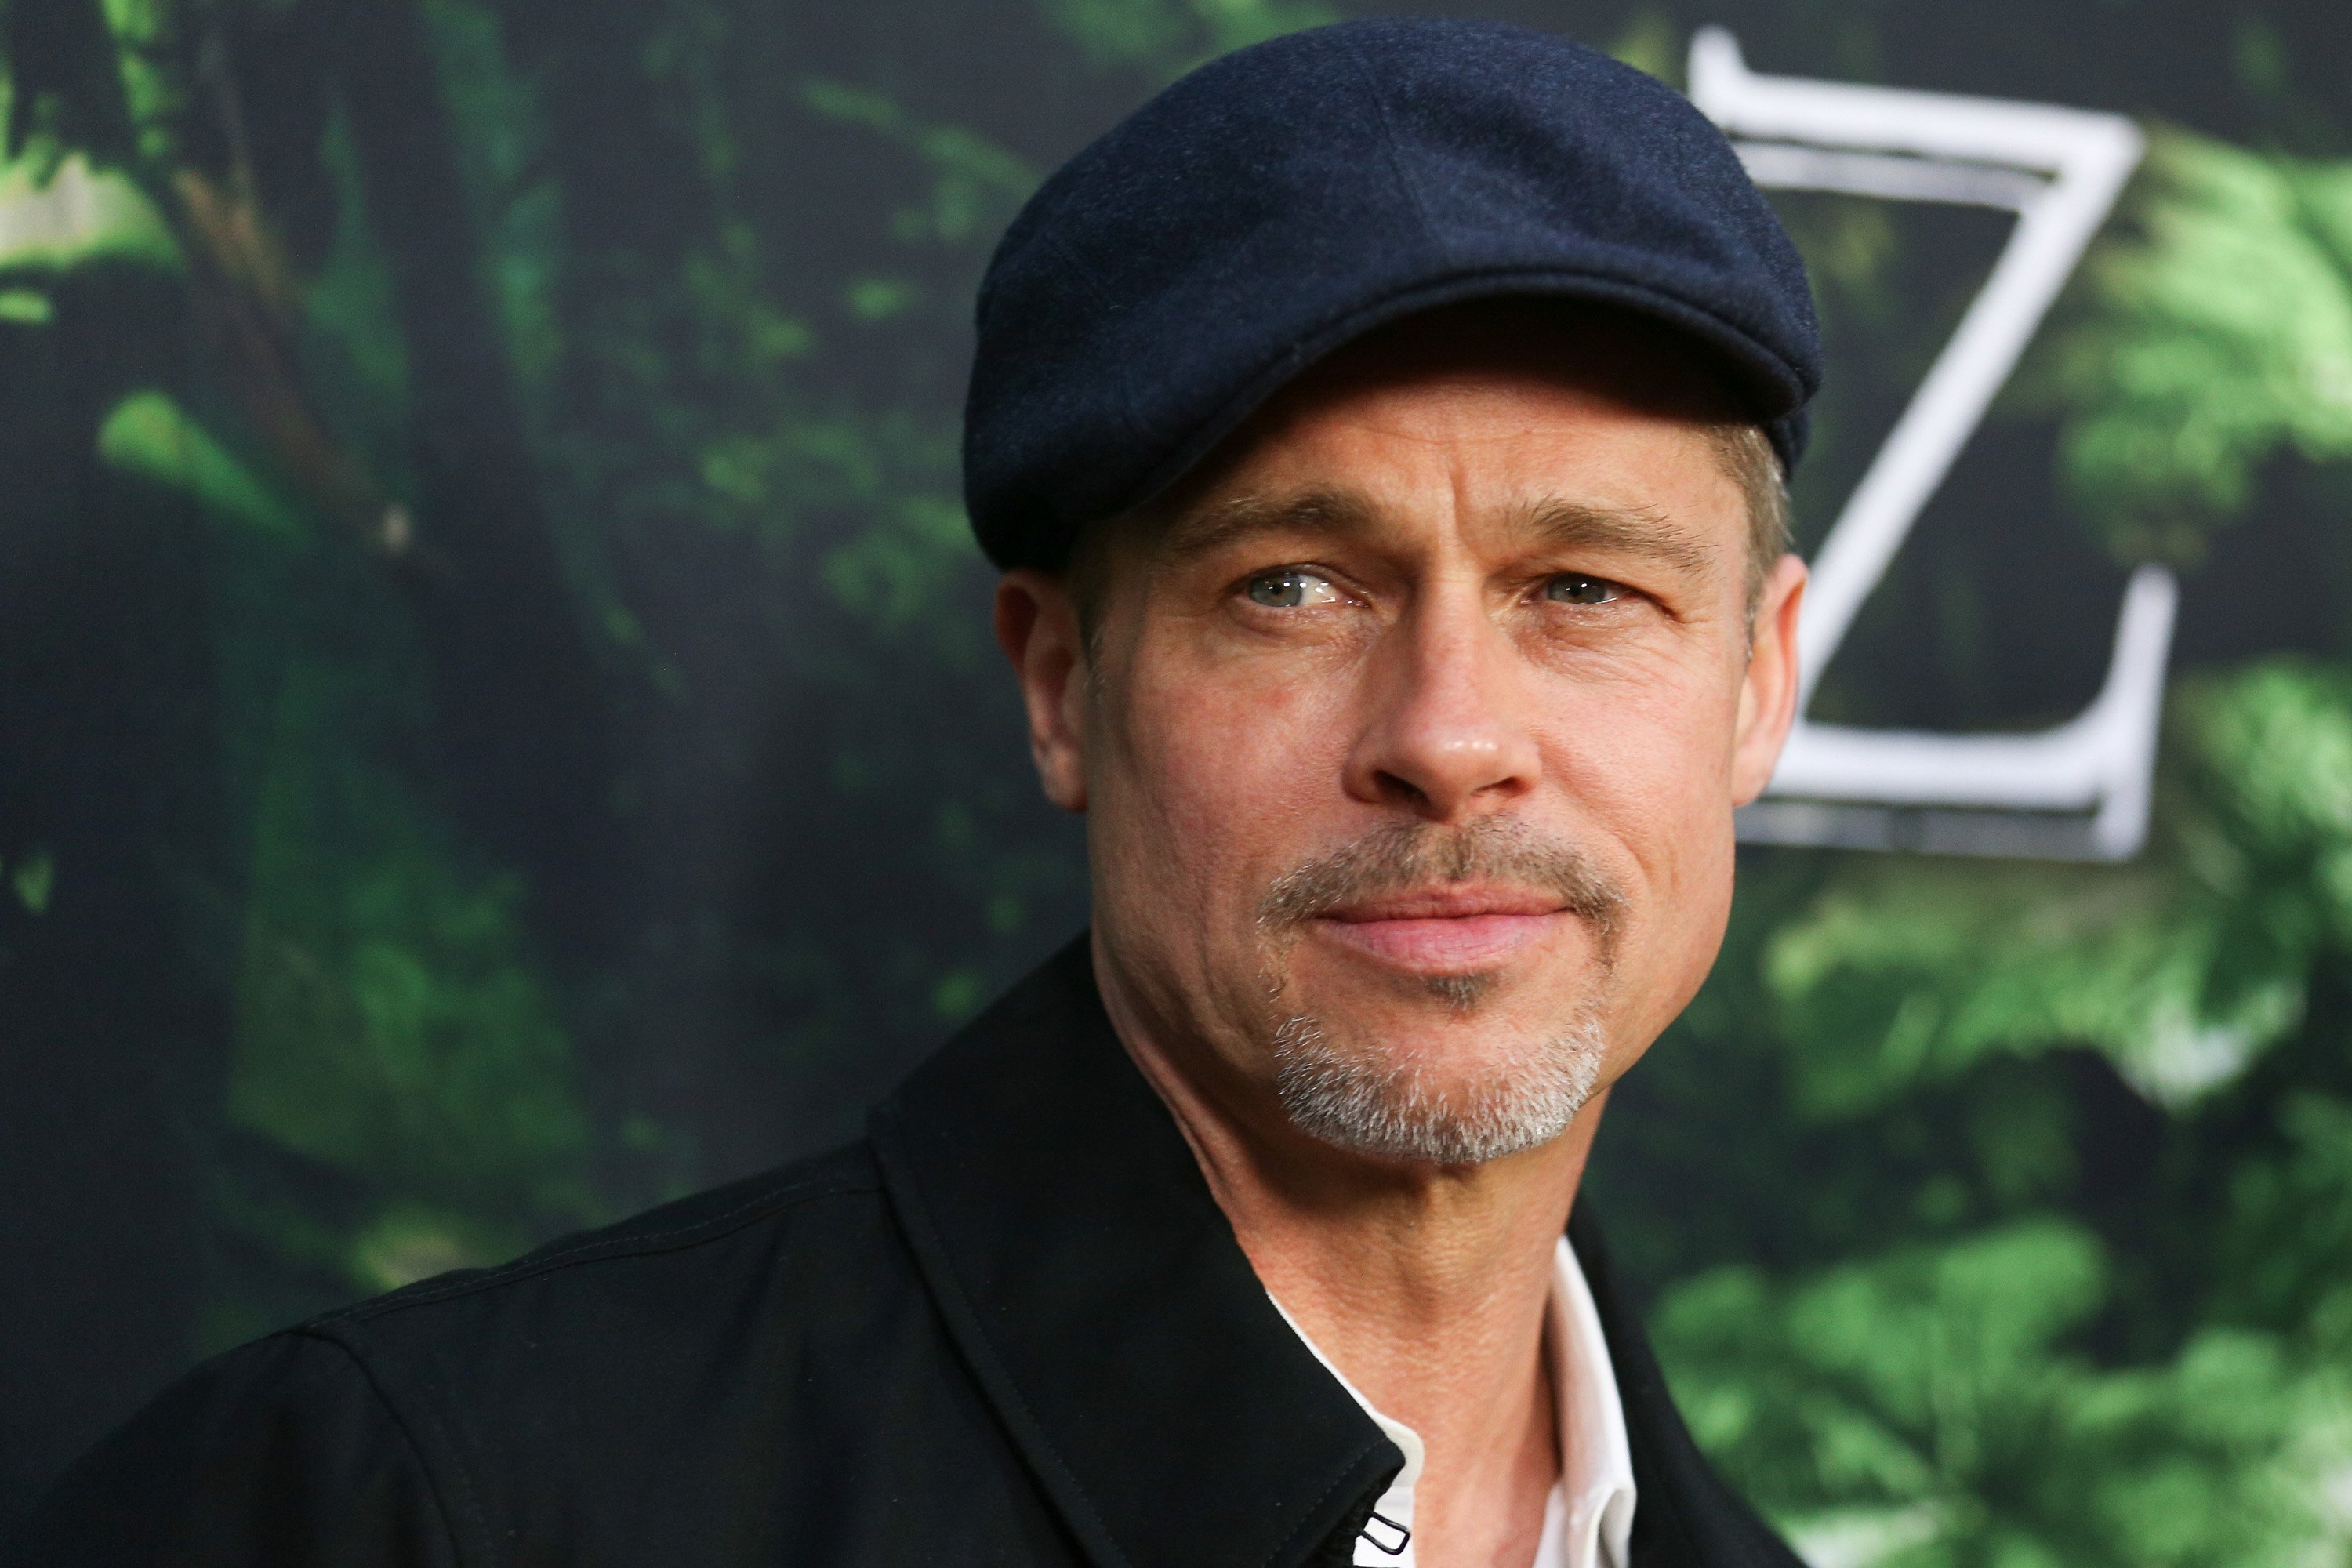 The multi-awarded actor Brad Pitt. | Photo: Getty Images